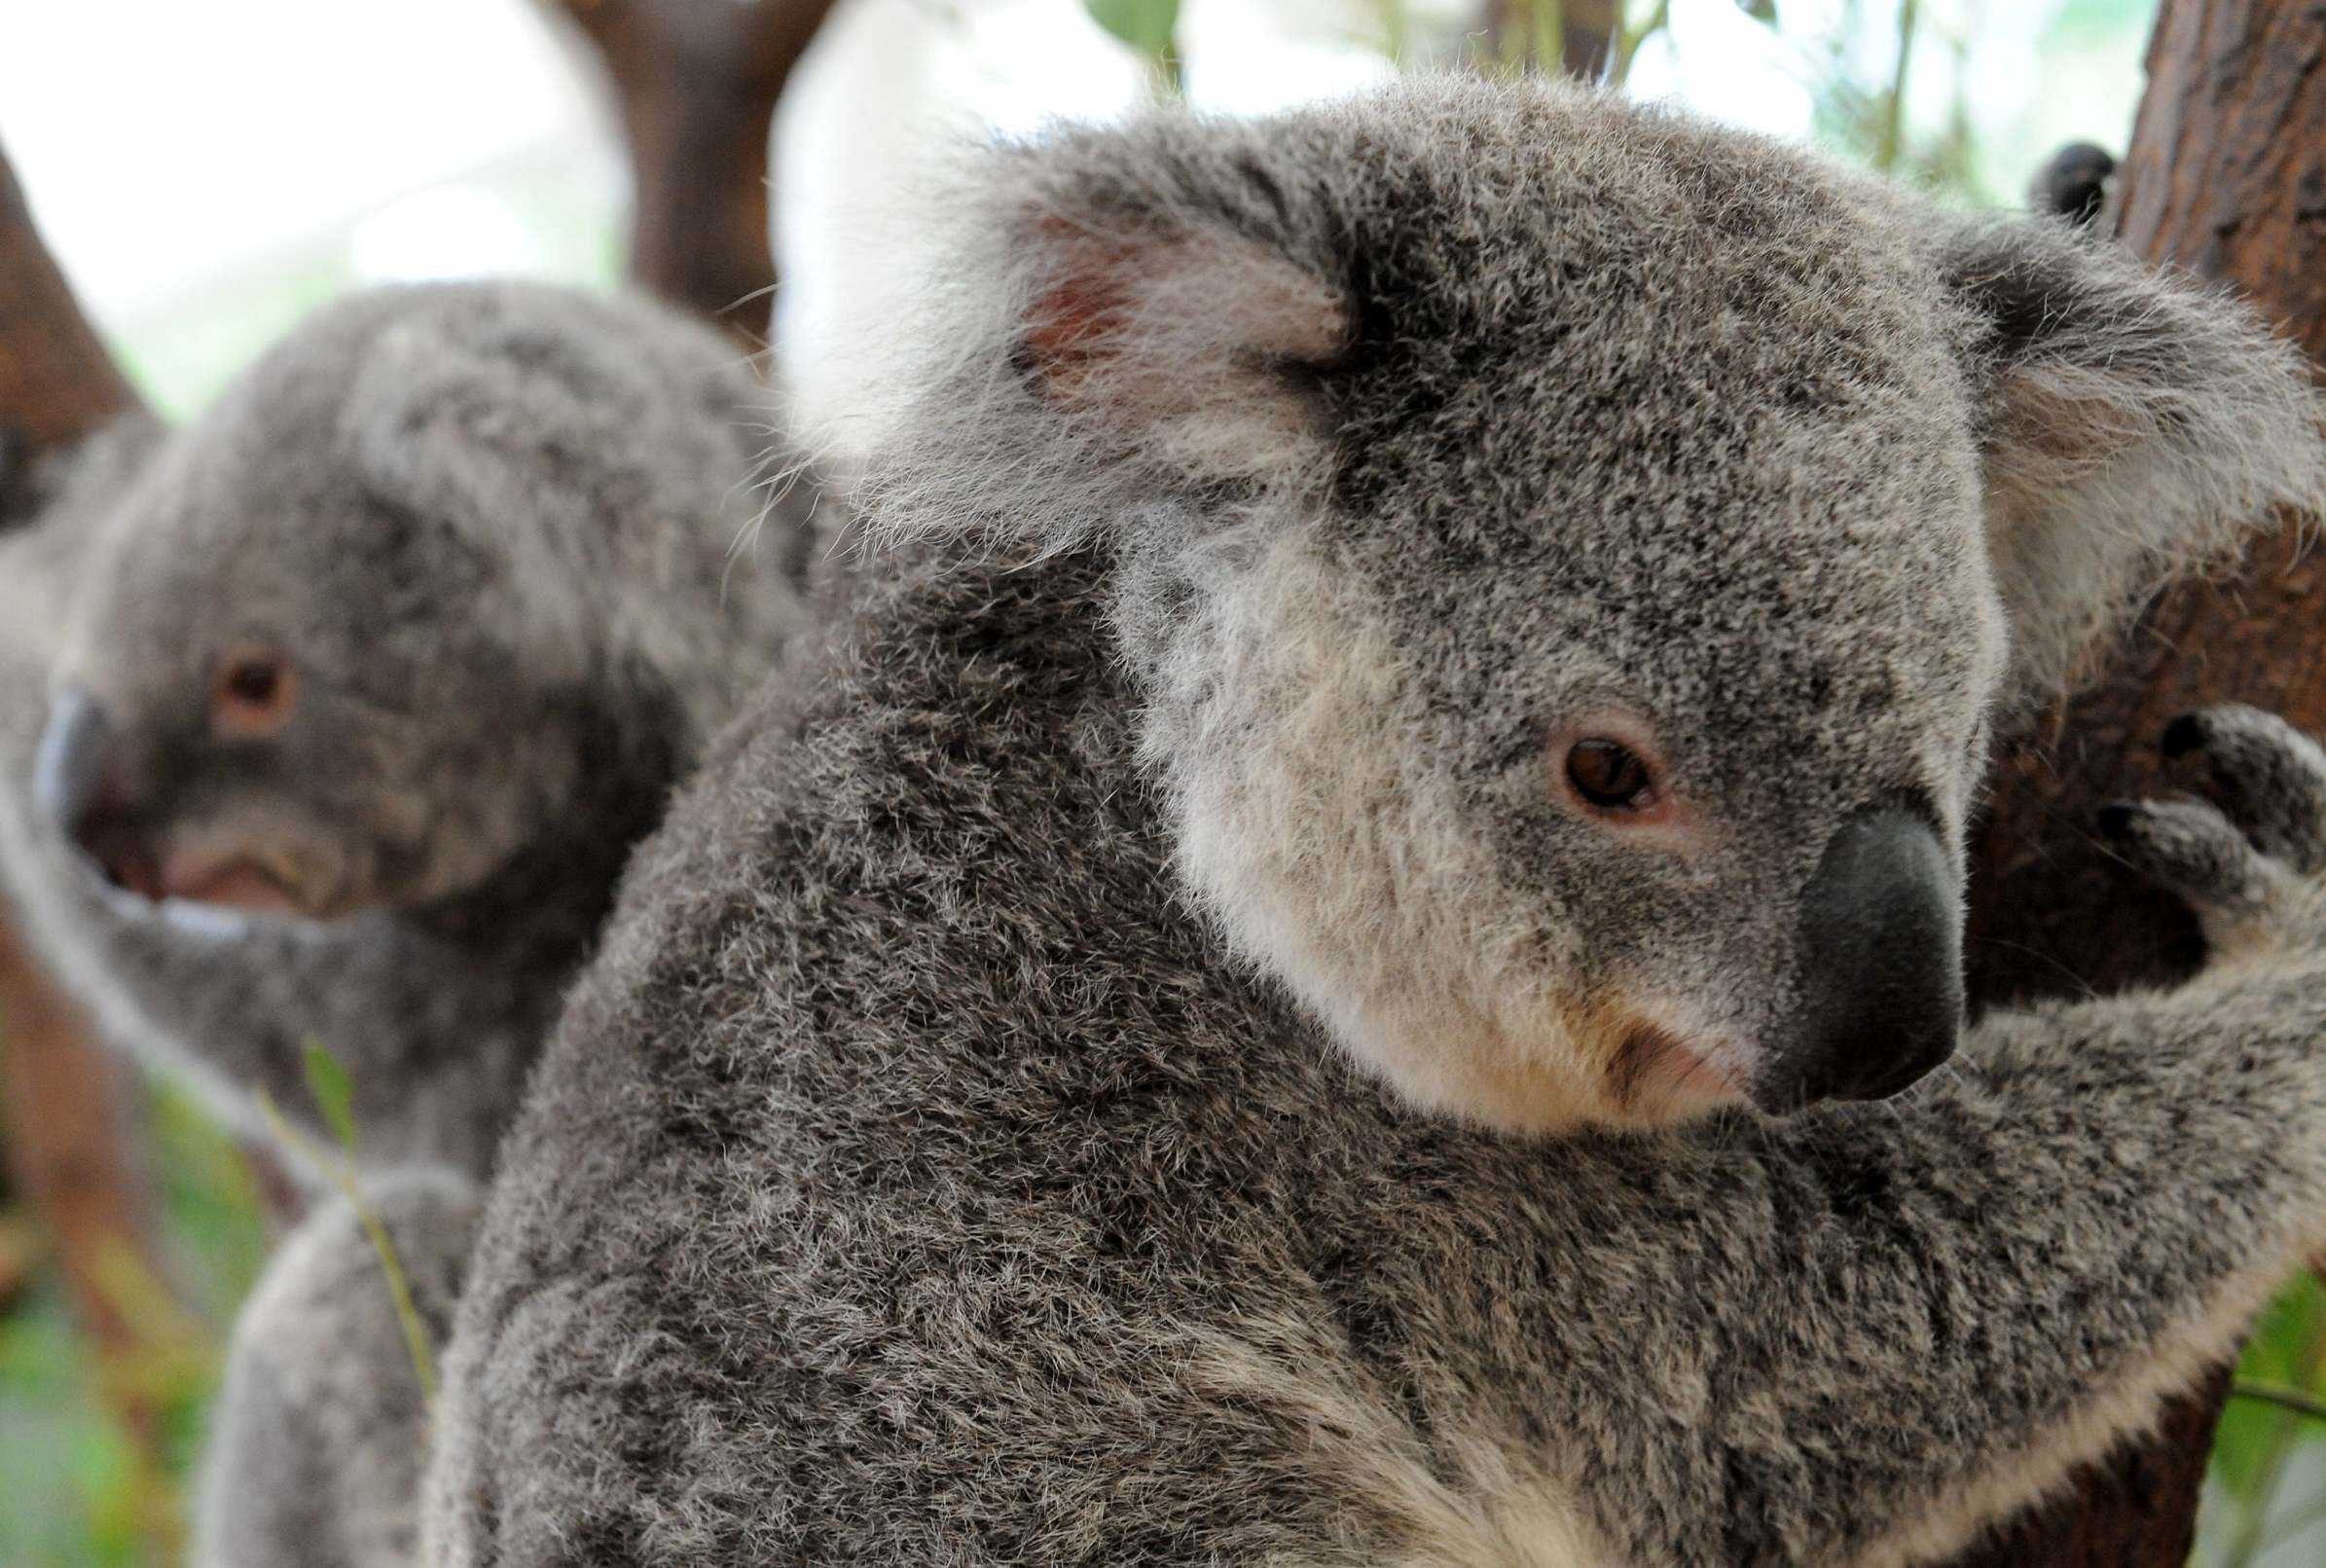 There is much to learn from Koala genes